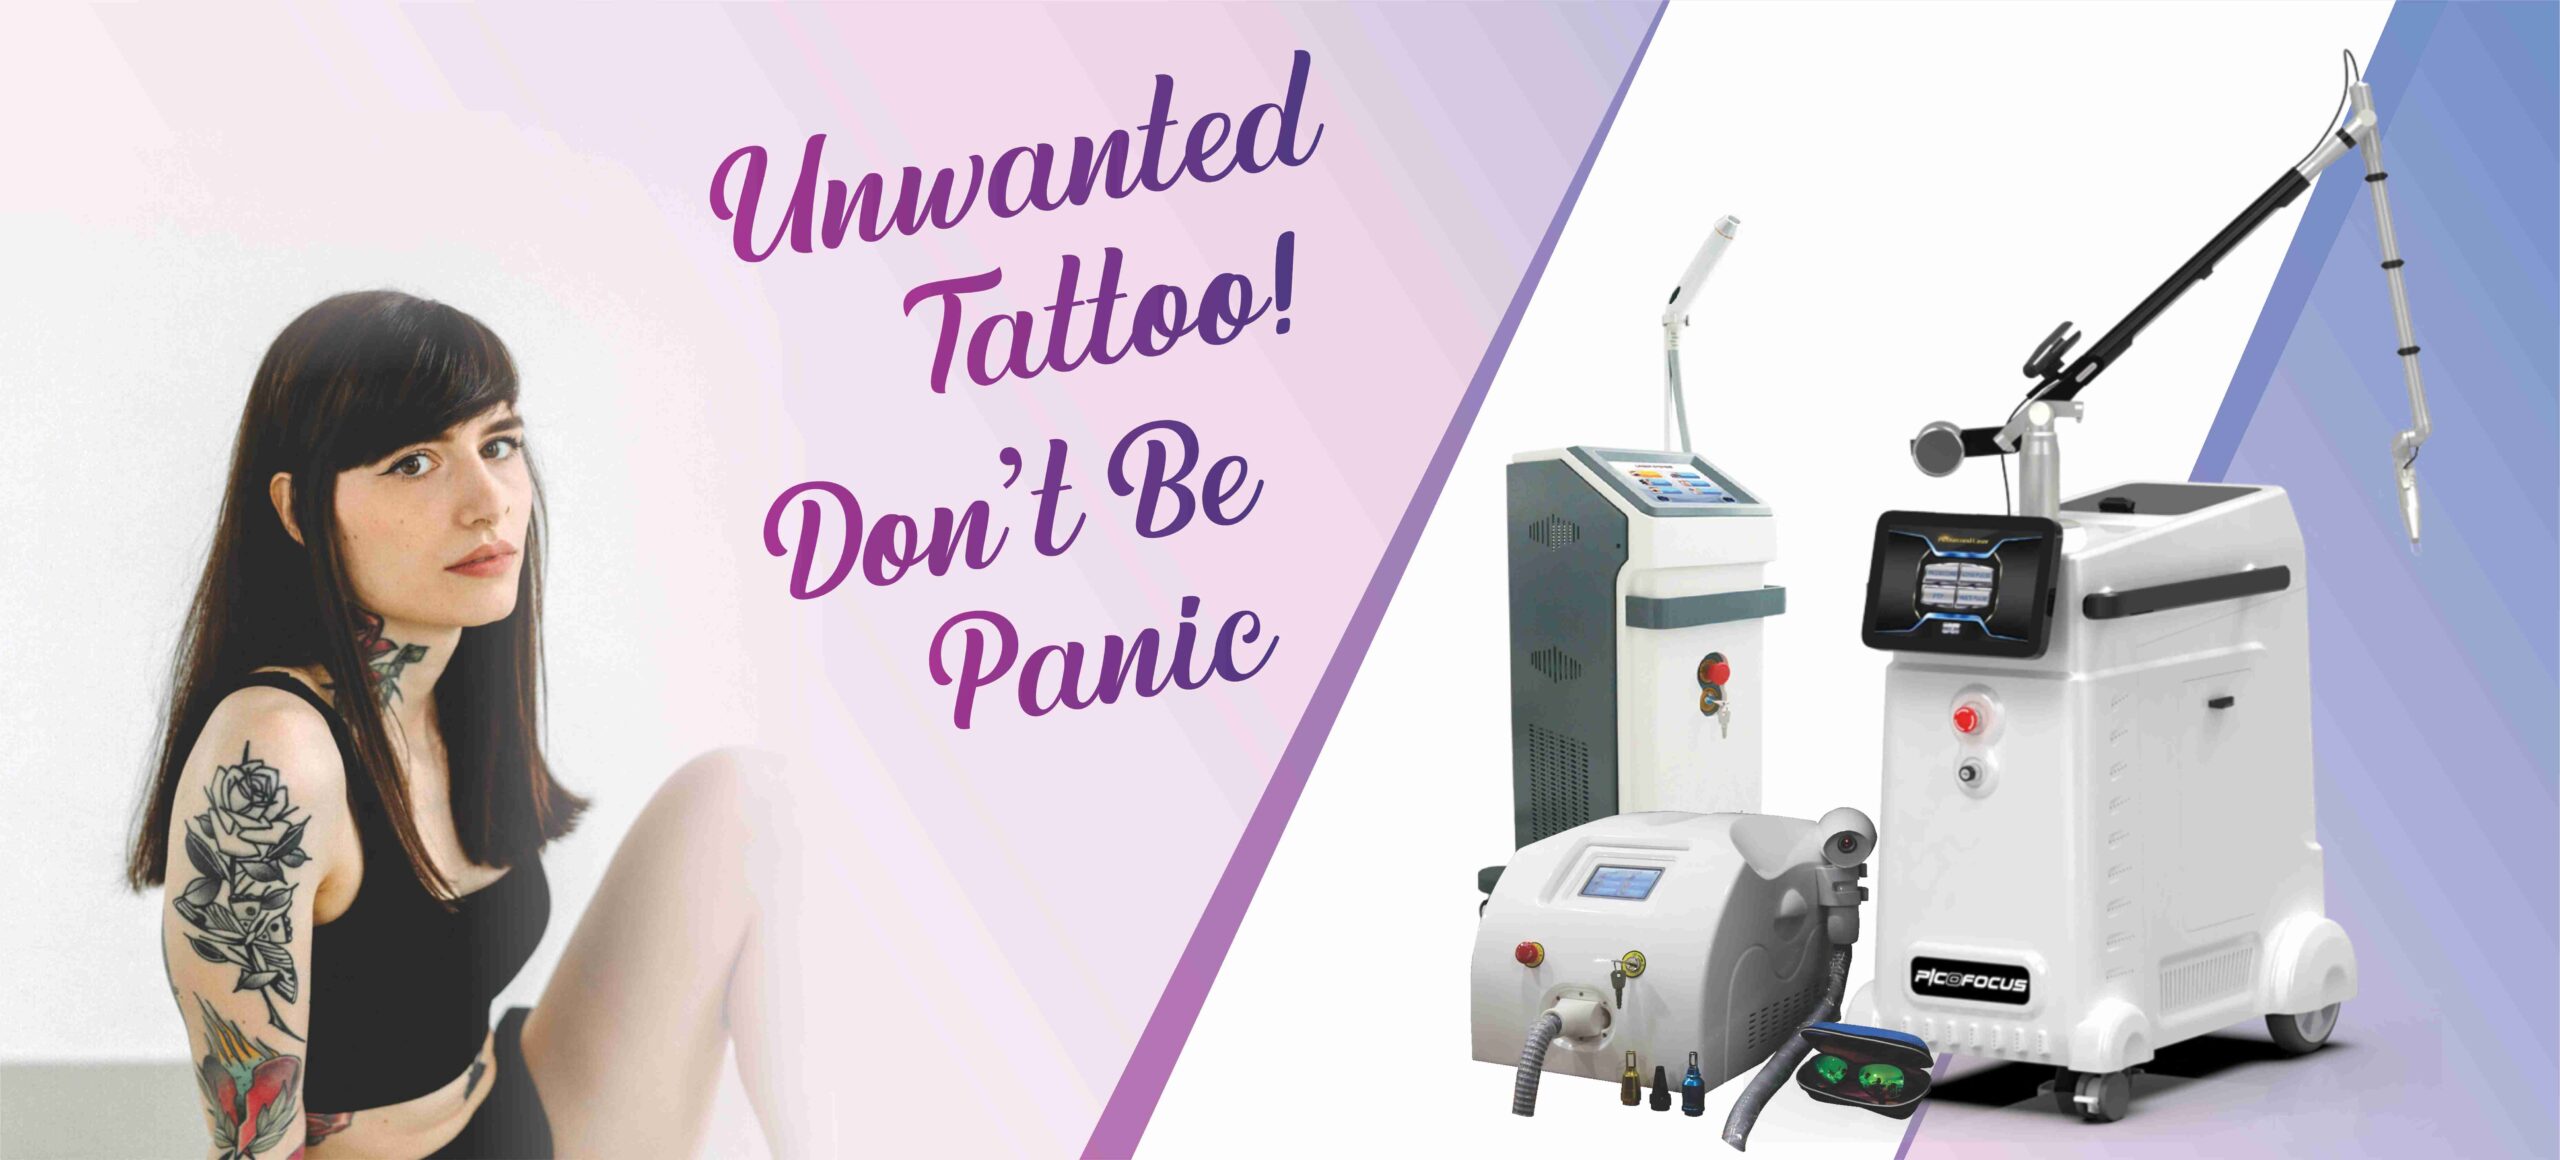 tattoo-removal-sparsh skin-lasers